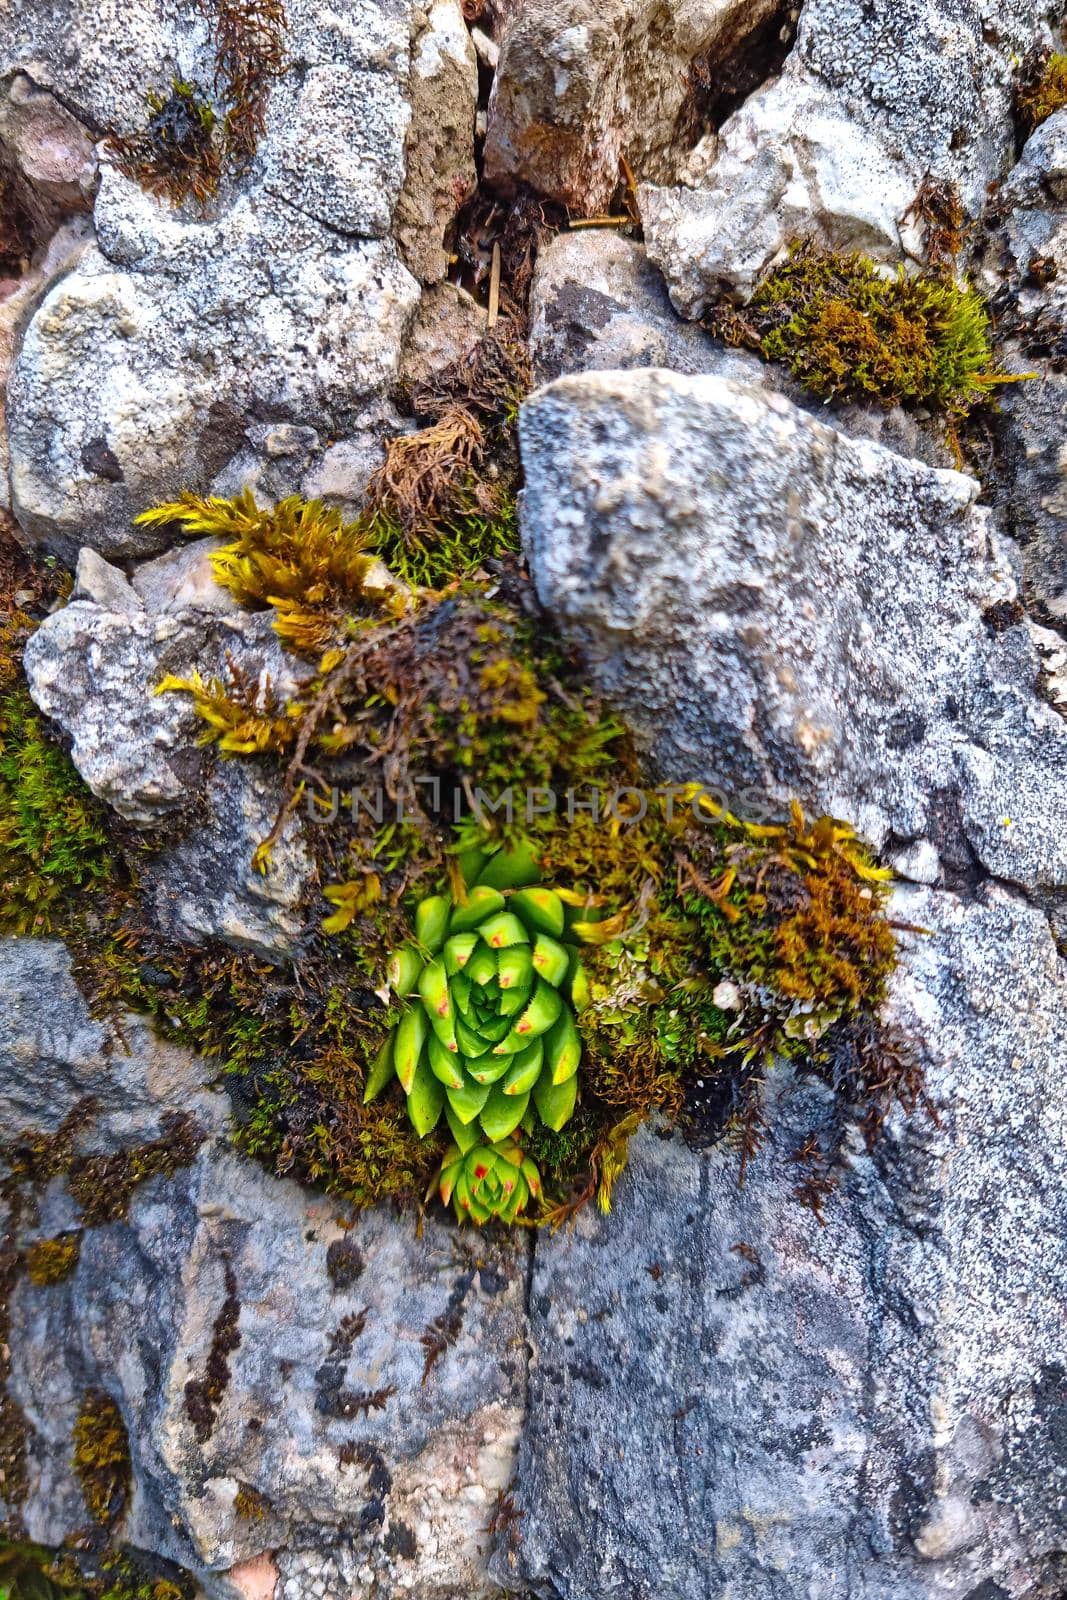 From the rock grows green moss and sucullenta in the forest